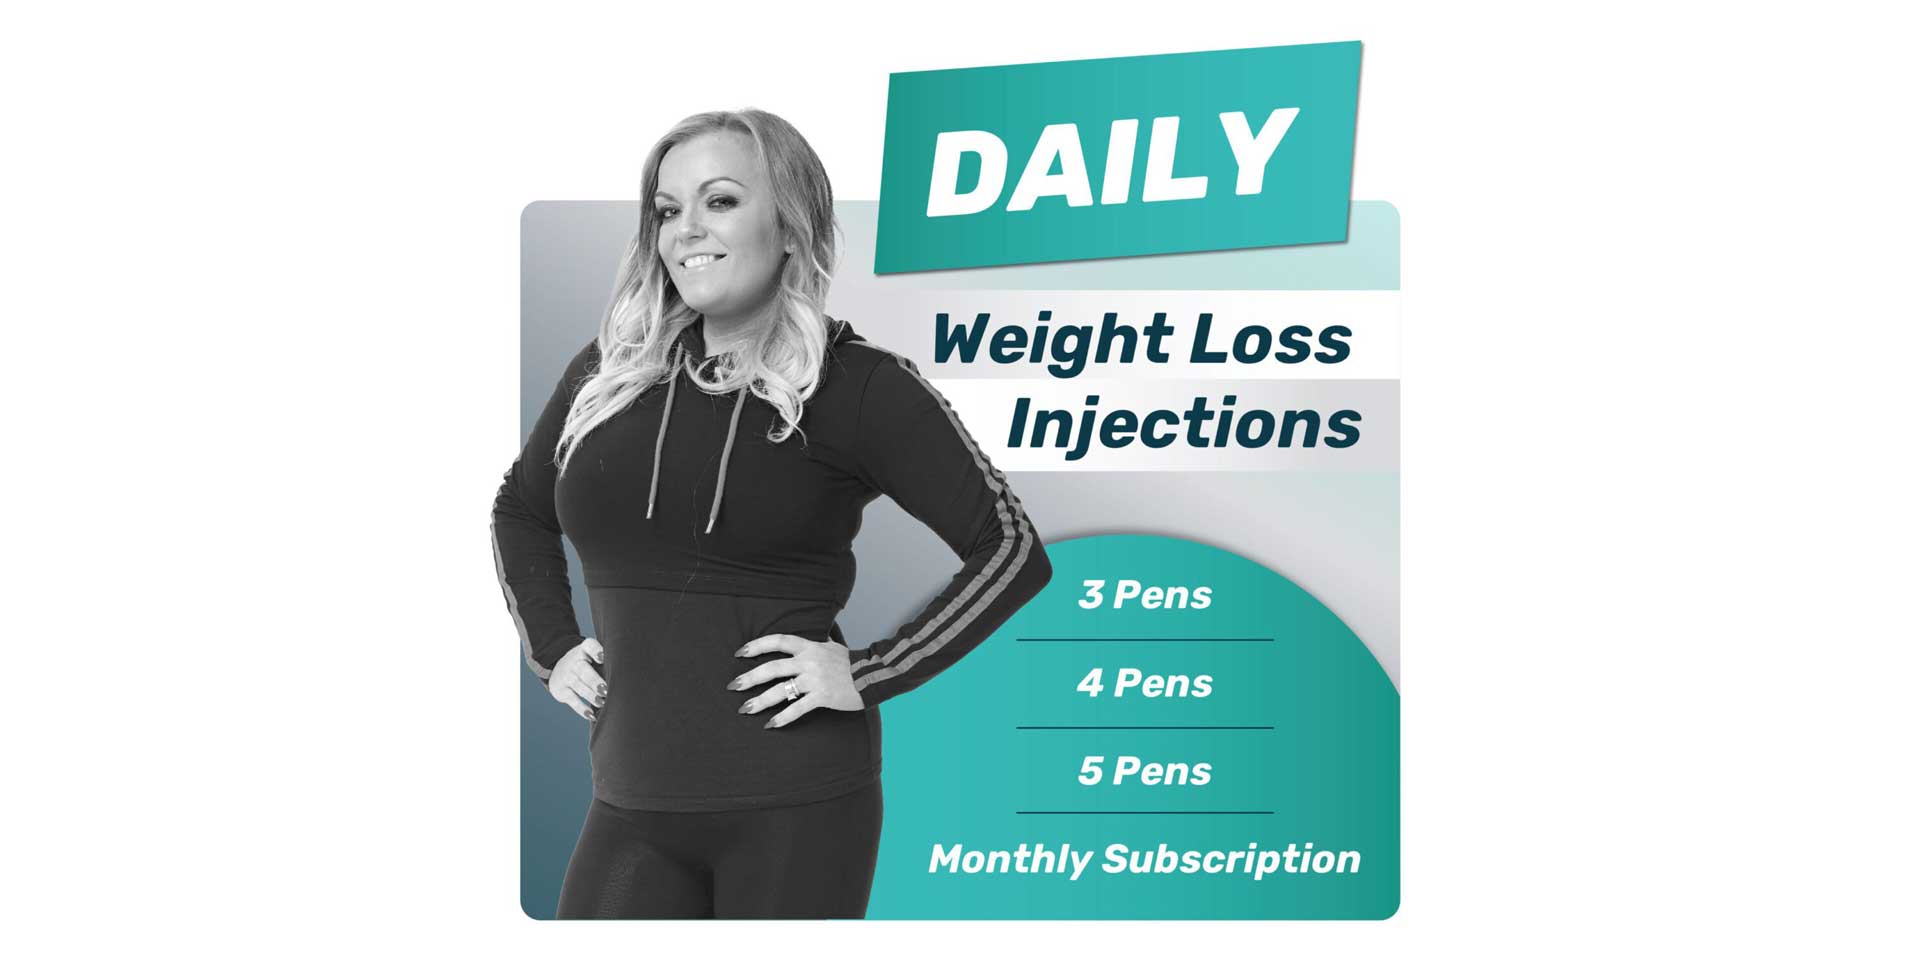 Weight loss injection types